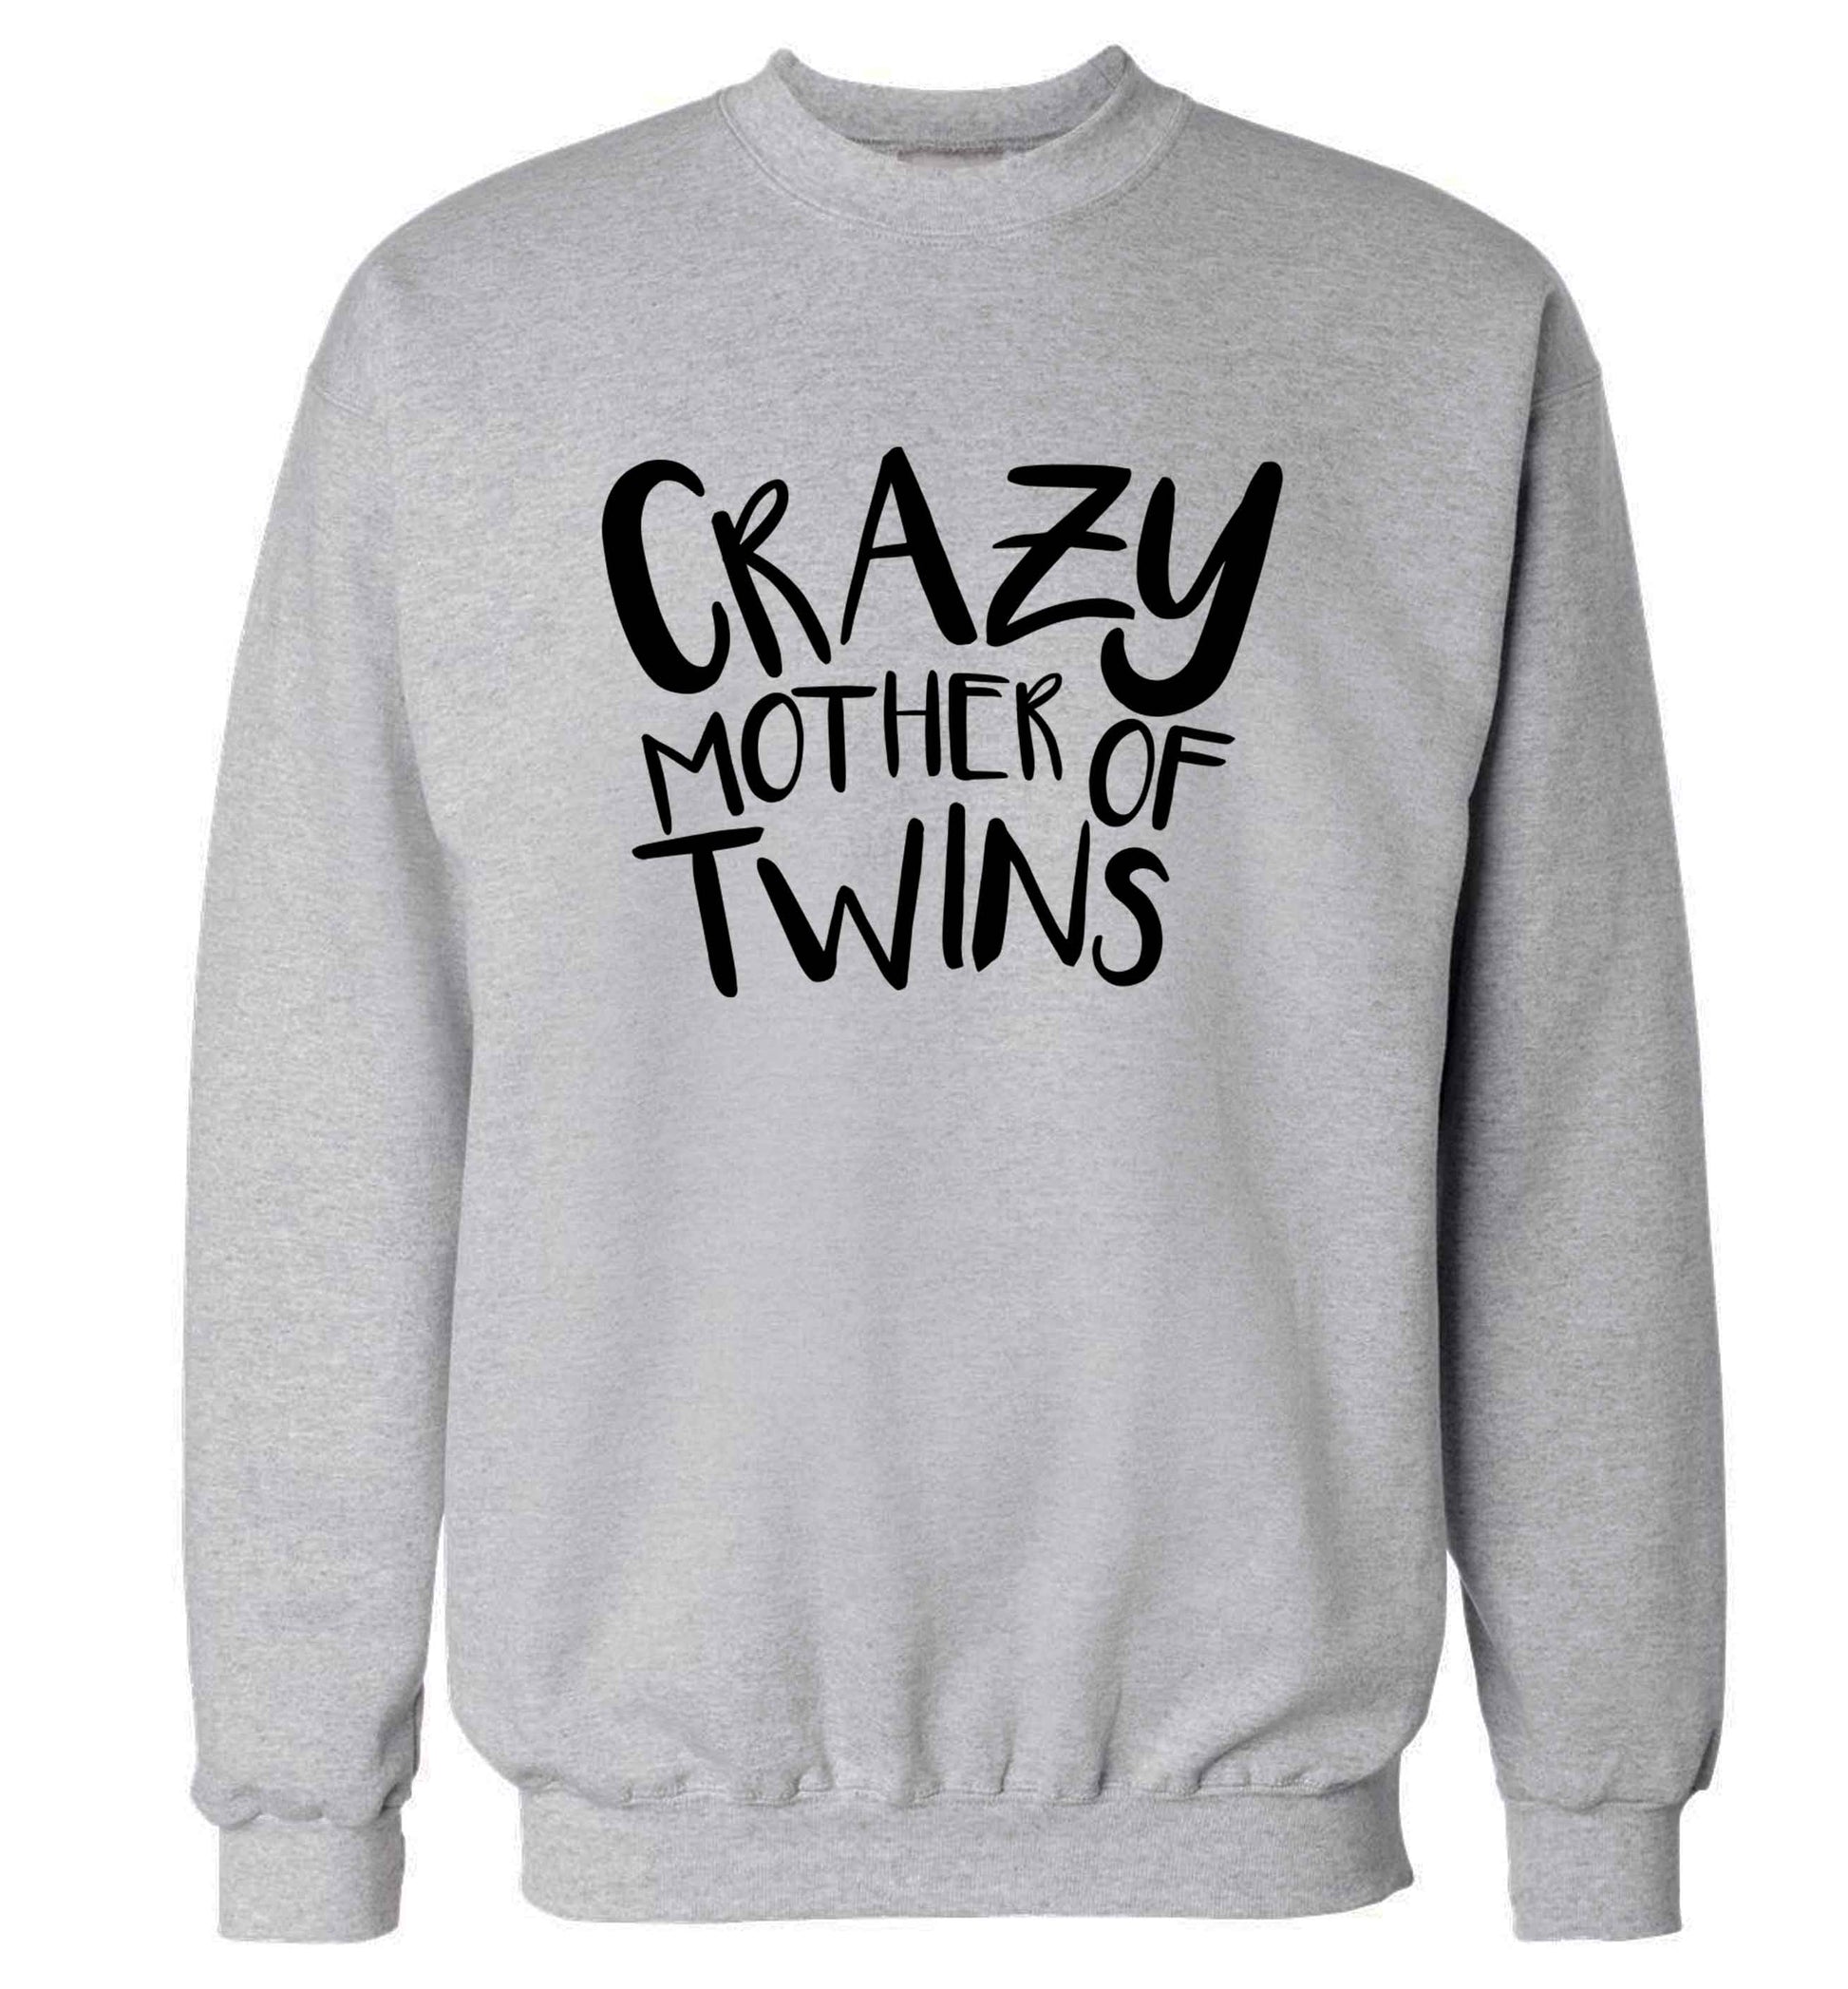 Crazy mother of twins adult's unisex grey sweater 2XL